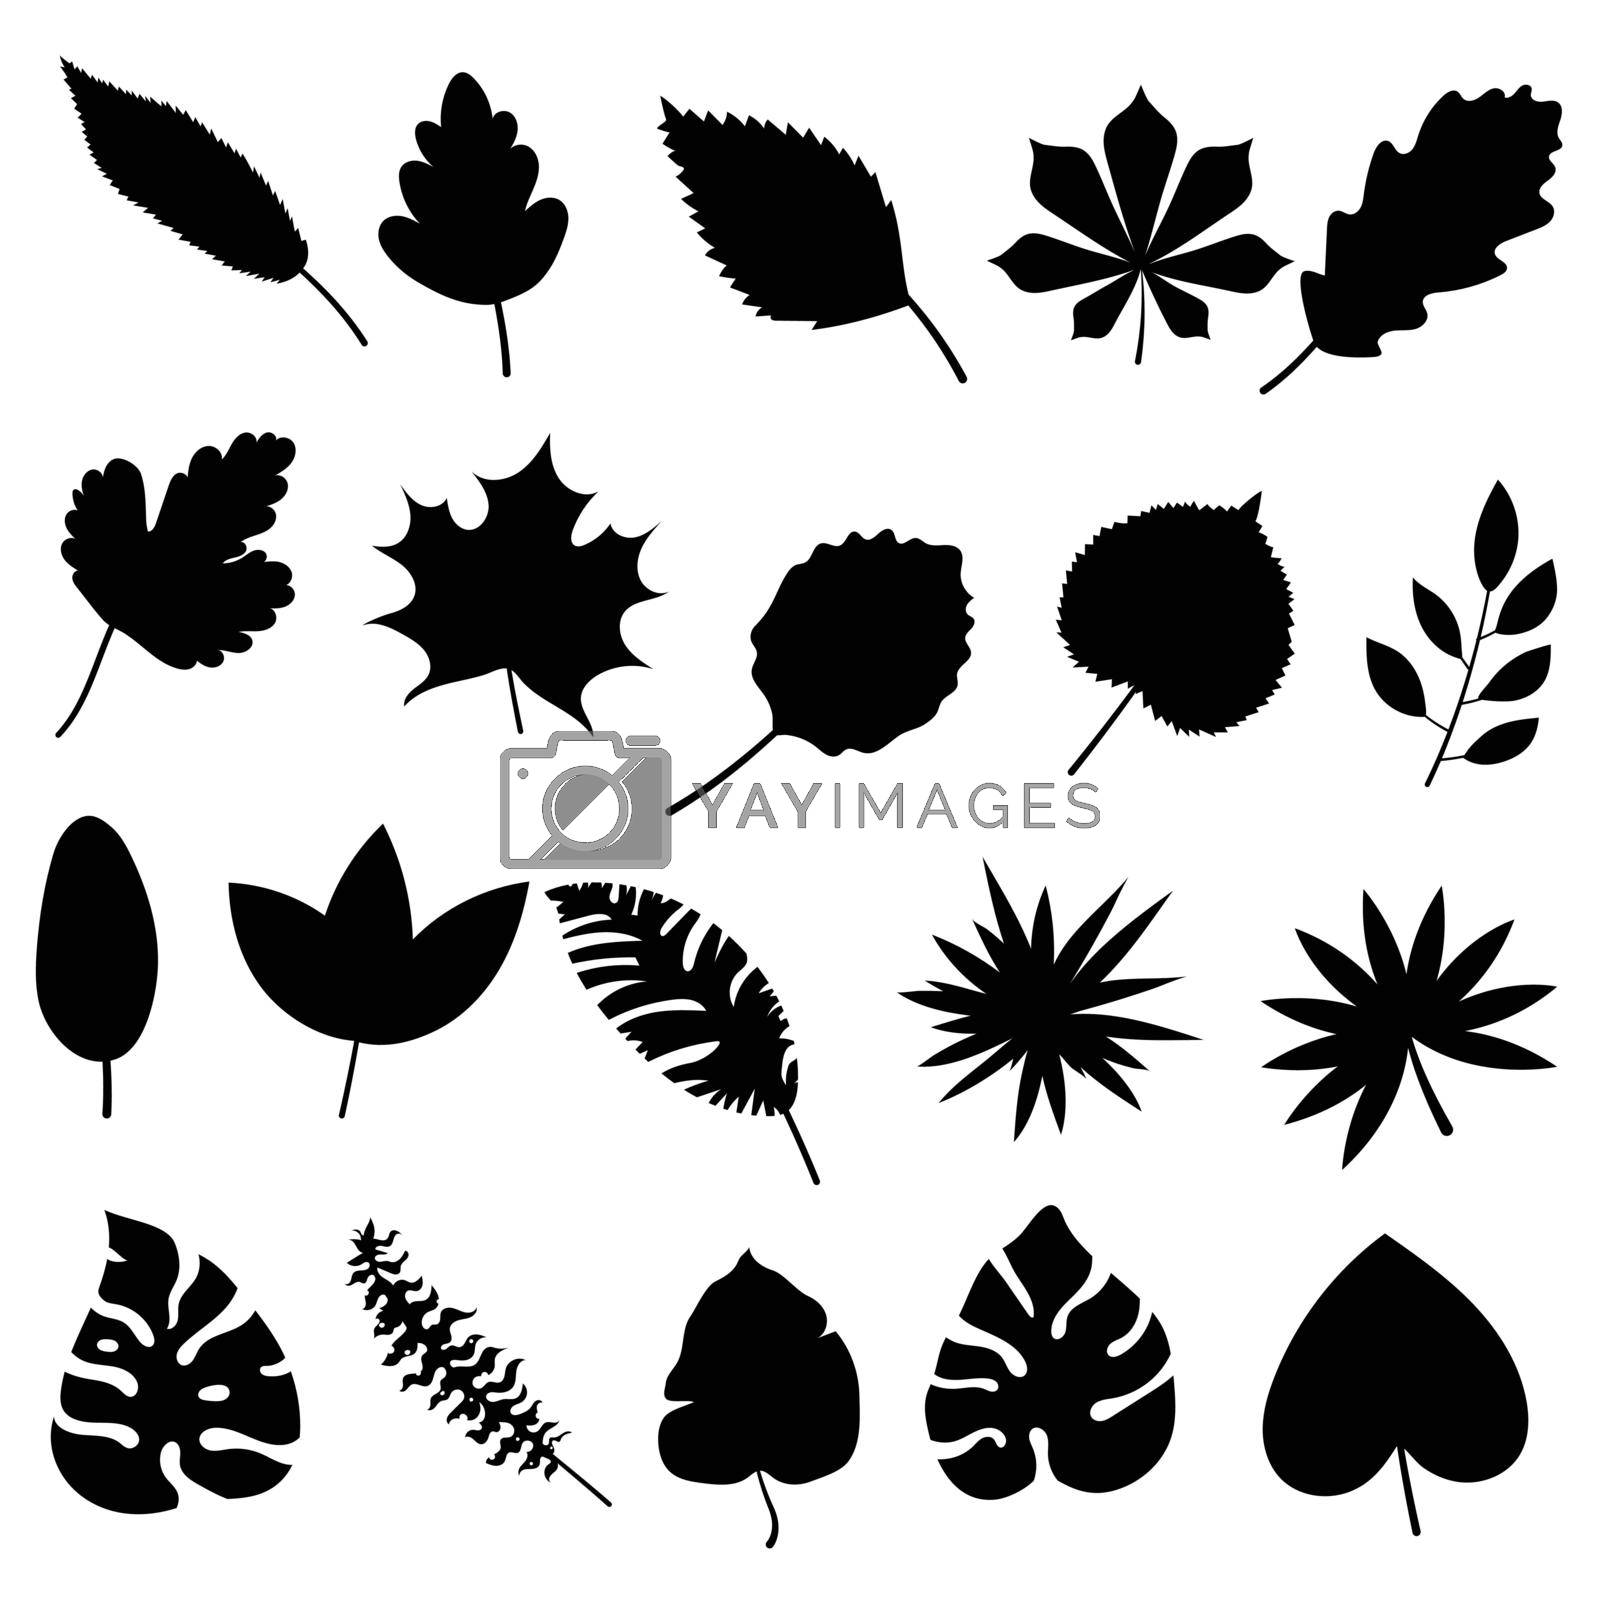 Royalty free image of Leaf silhouette cartoon by valueinvestor